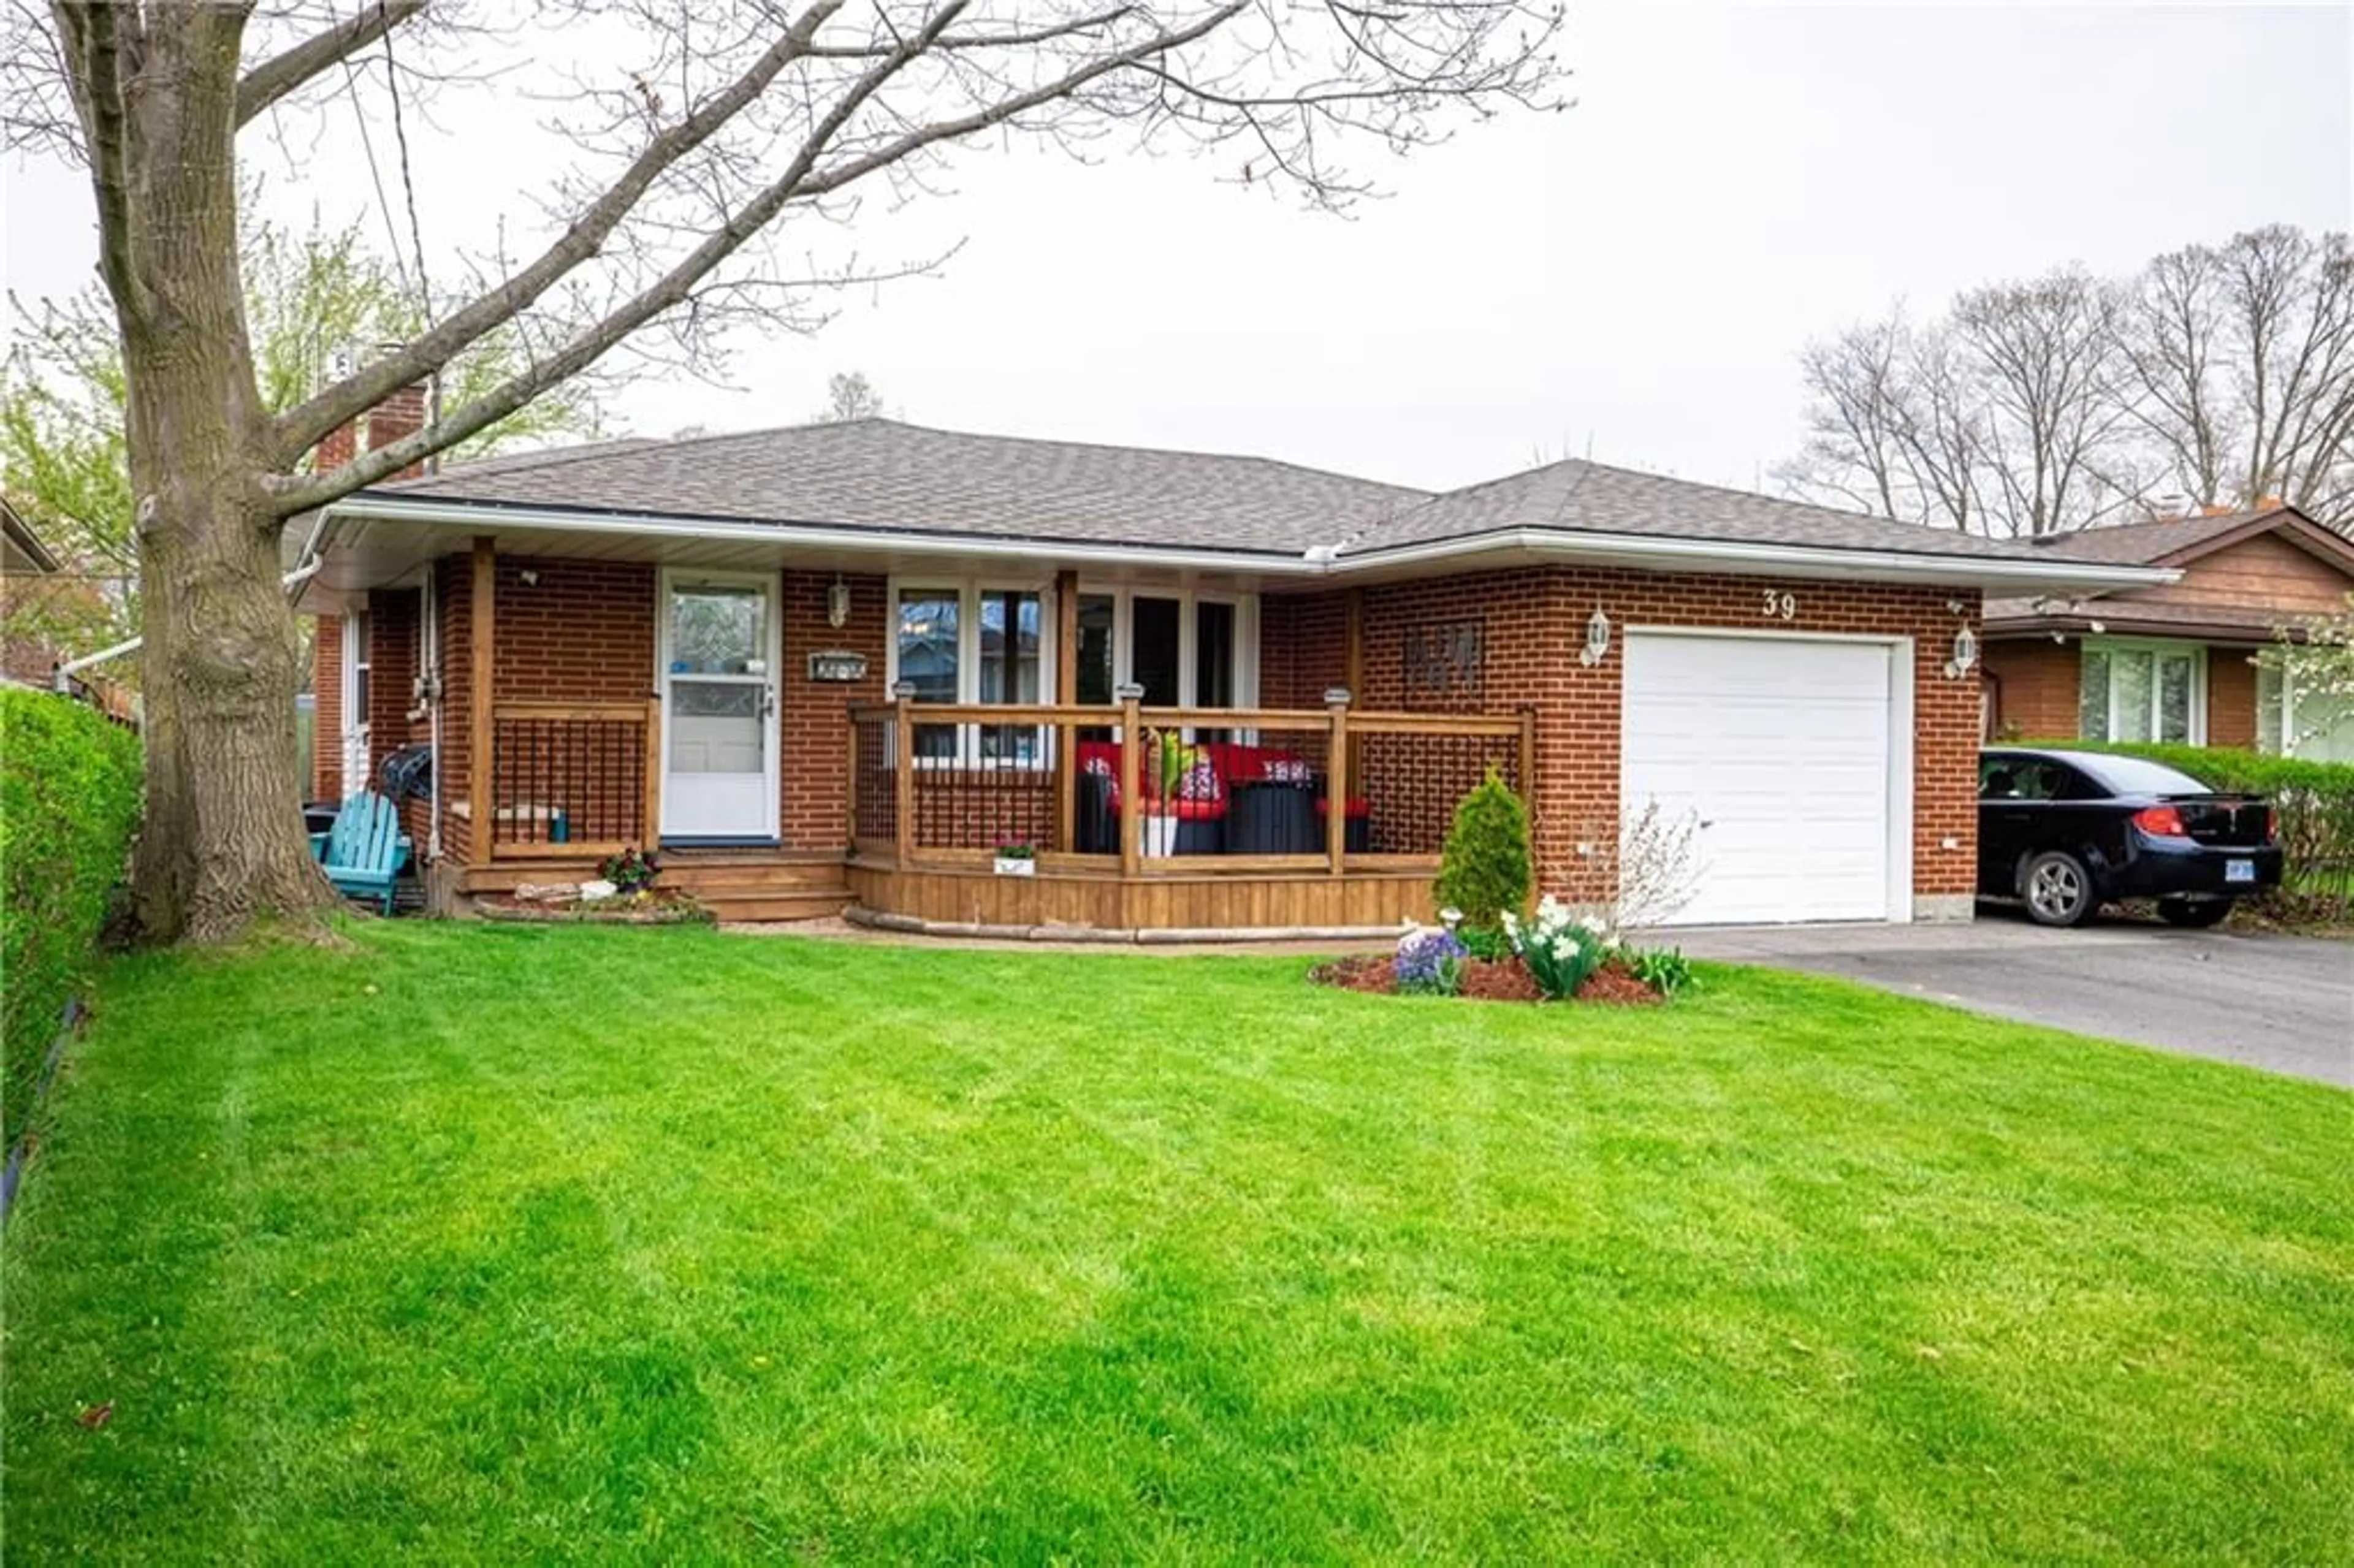 Home with brick exterior material for 39 DUNVEGAN Rd, St. Catharines Ontario L2P 1H5